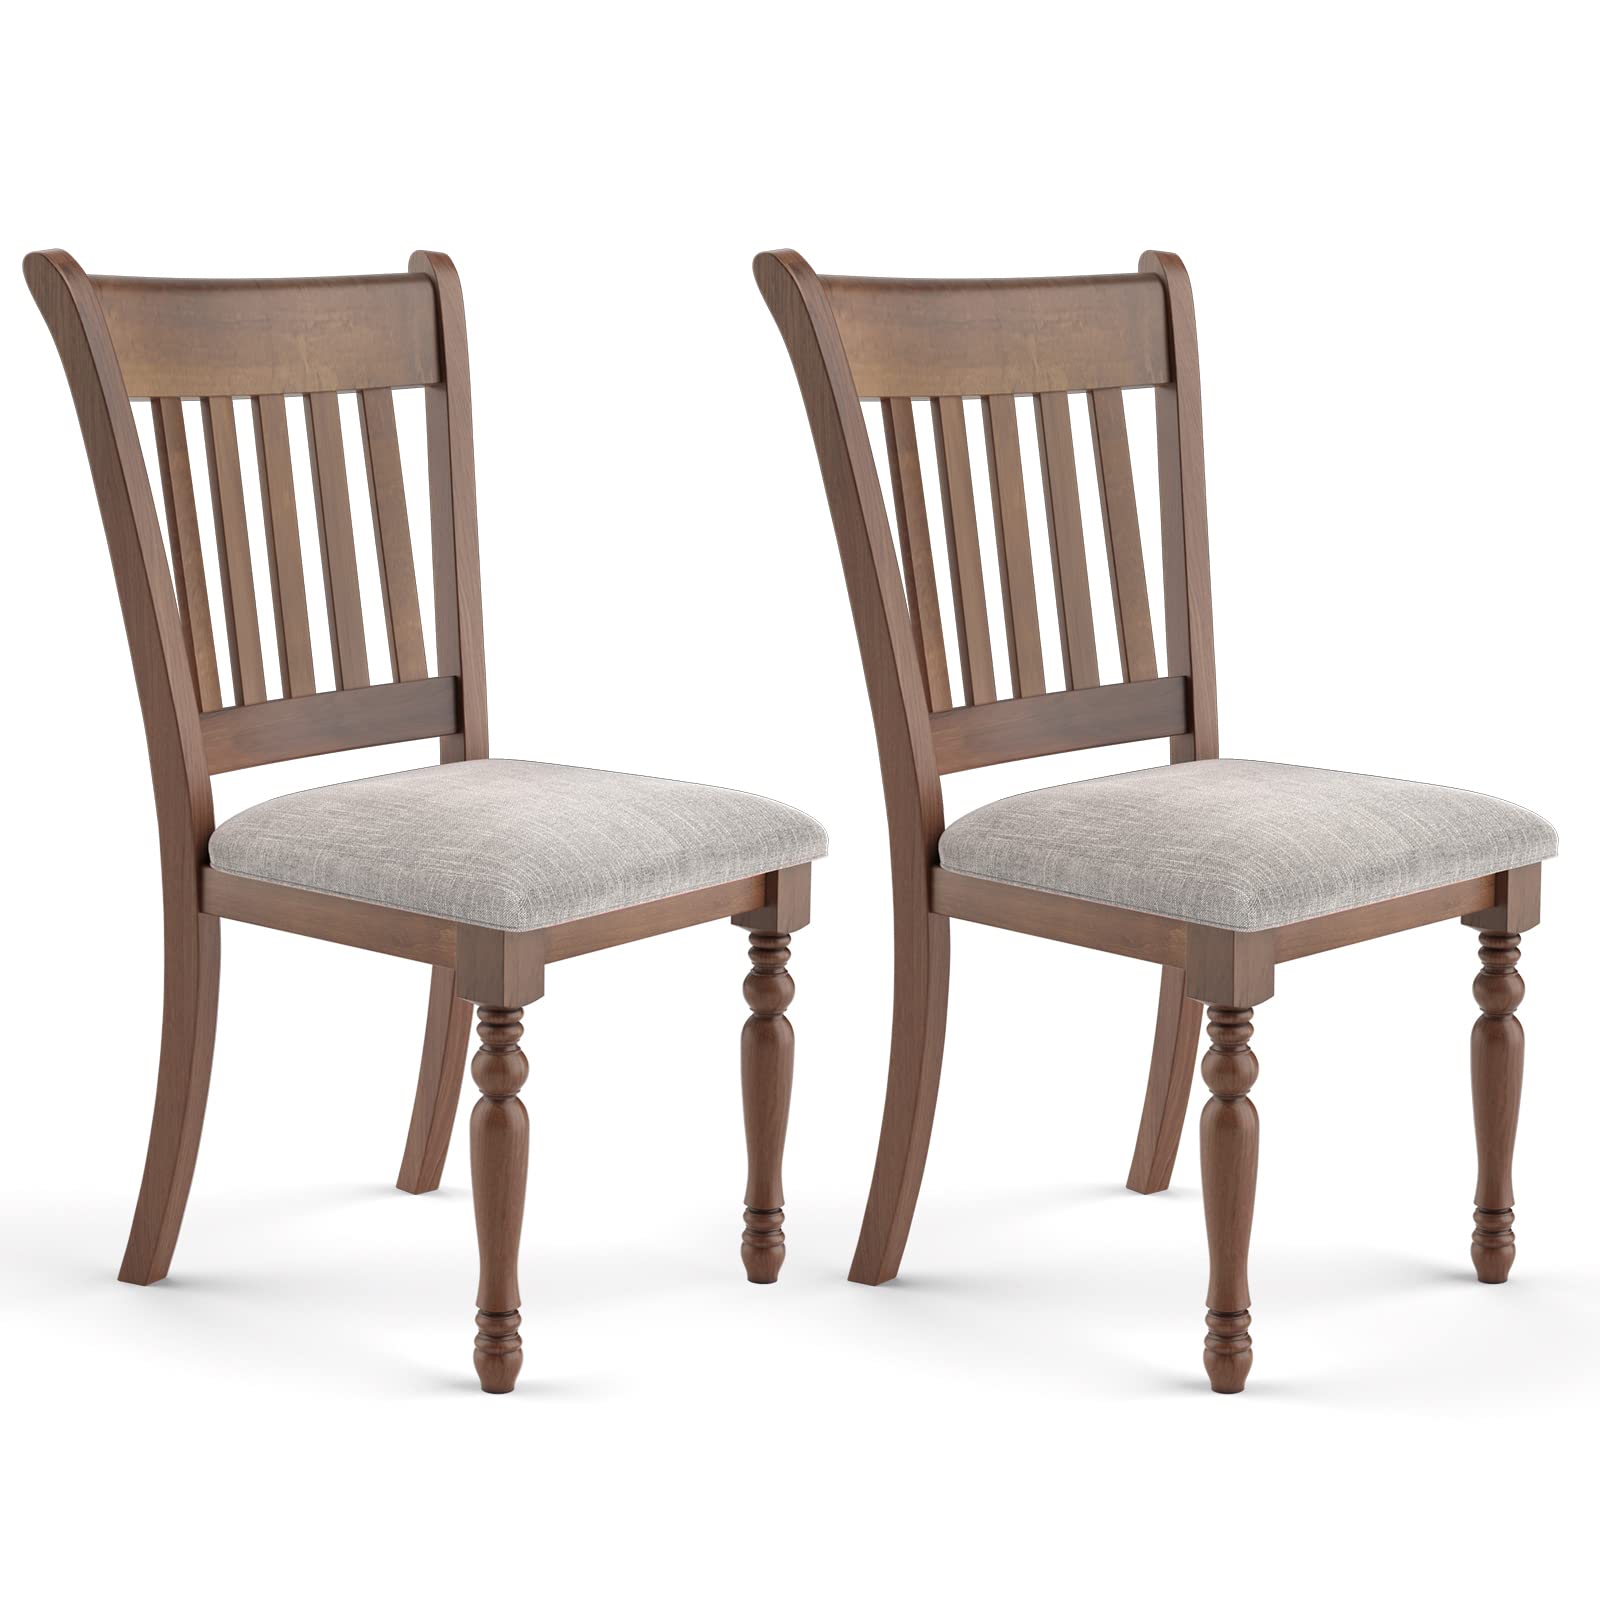 Giantex Set of 2 Upholstered Dining Chairs, Vintage Wooden Dining Chairs, Greyish Brown